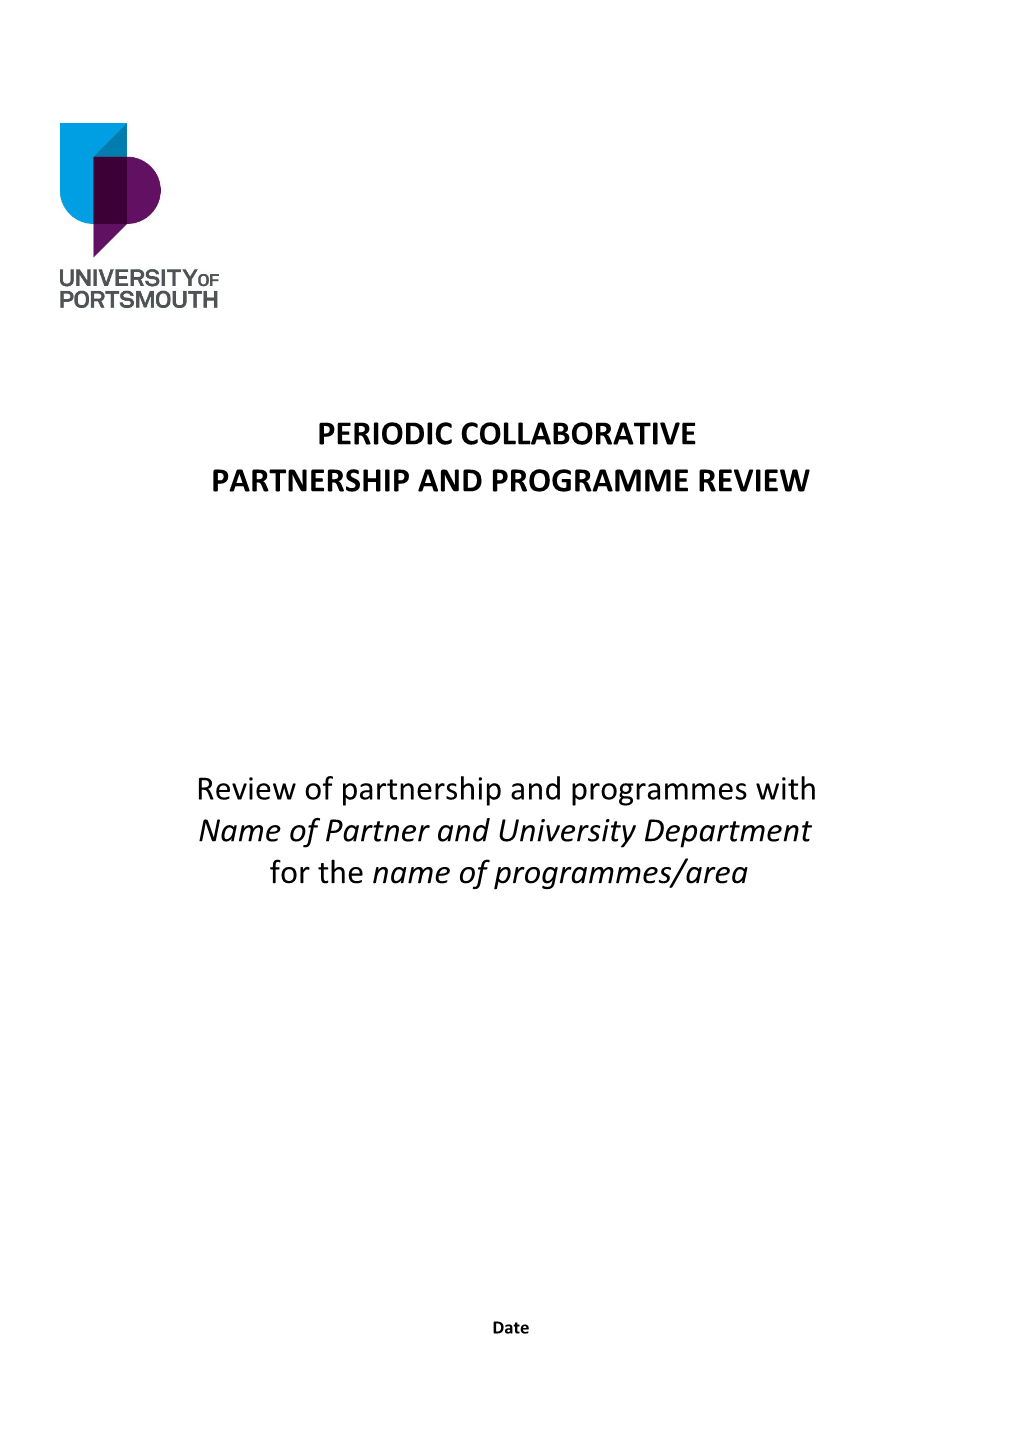 Partnership and Programme Review